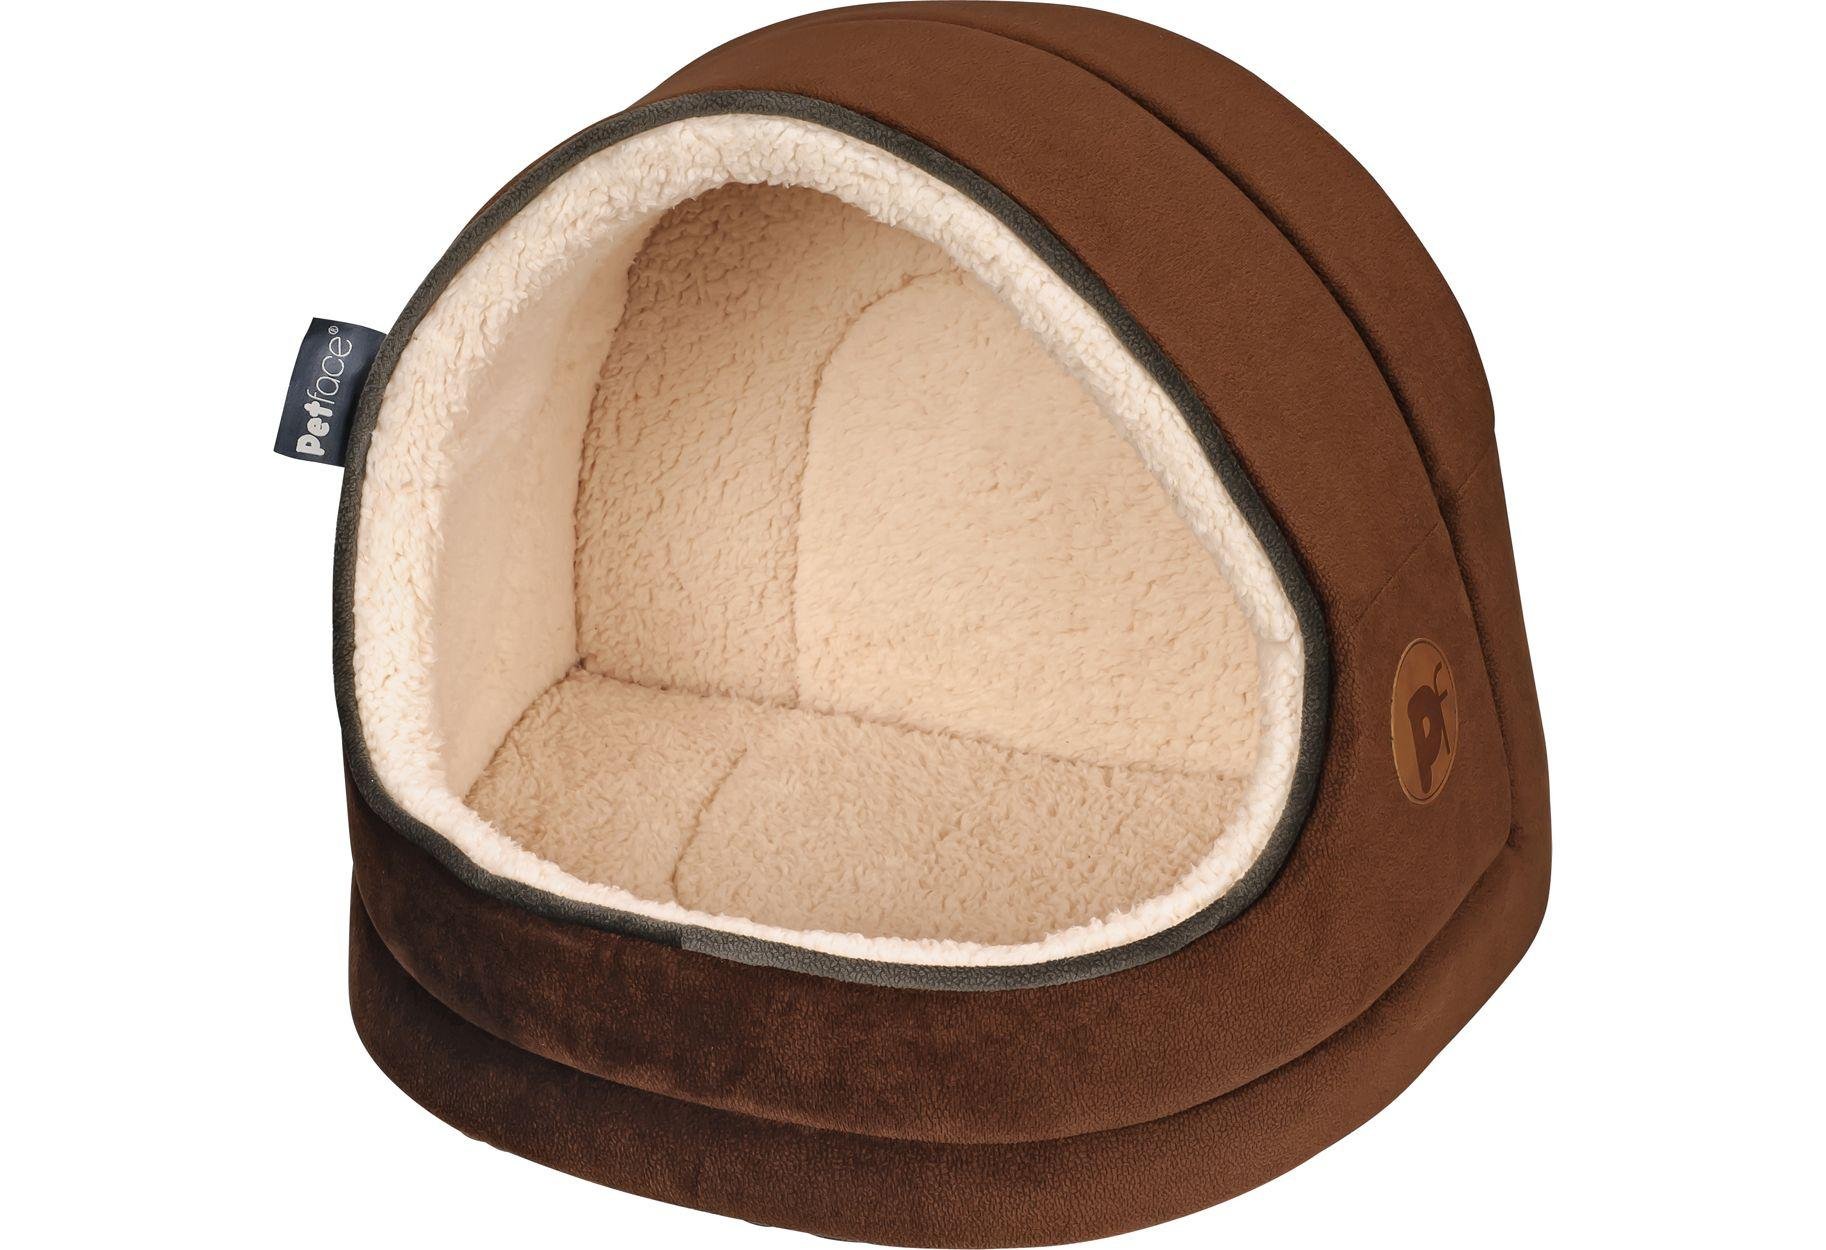 Petface Country Large Hooded Pet Bed - Chocolate